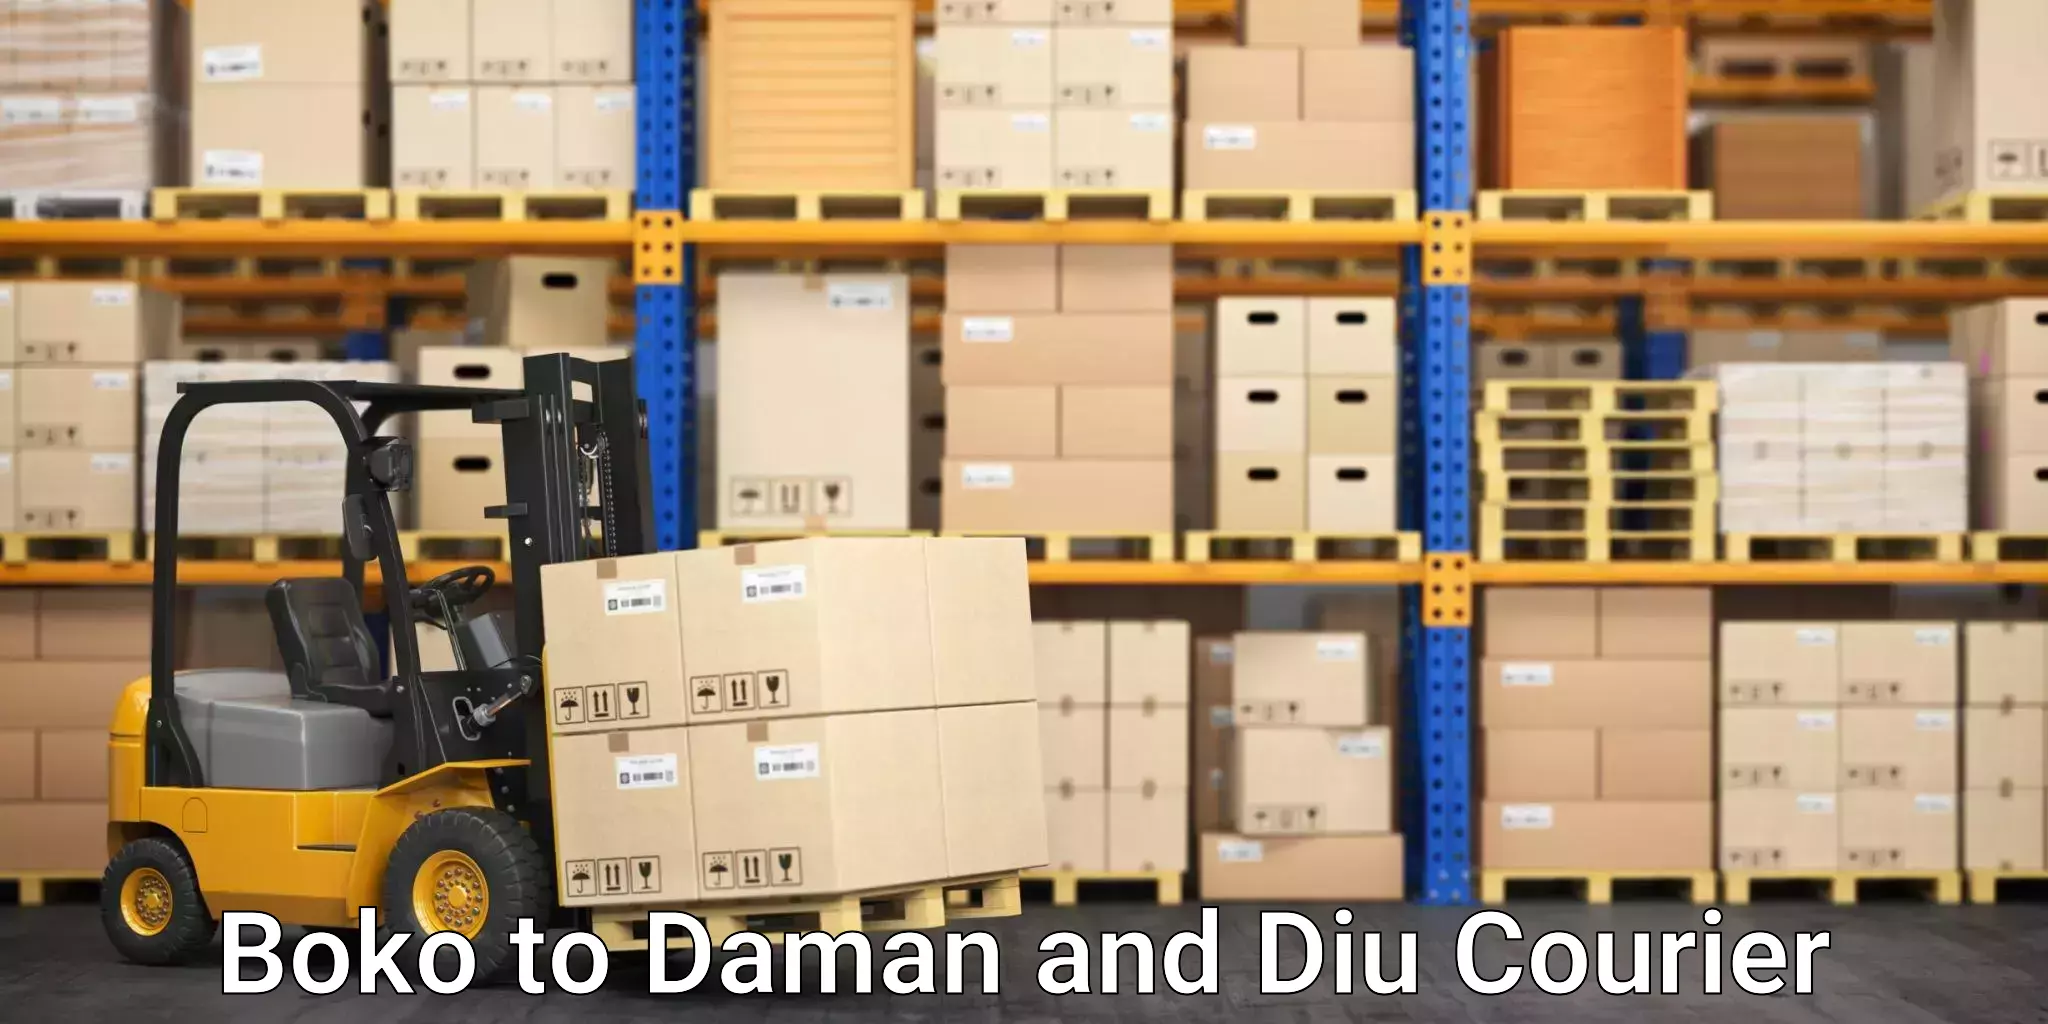 Air courier services Boko to Daman and Diu